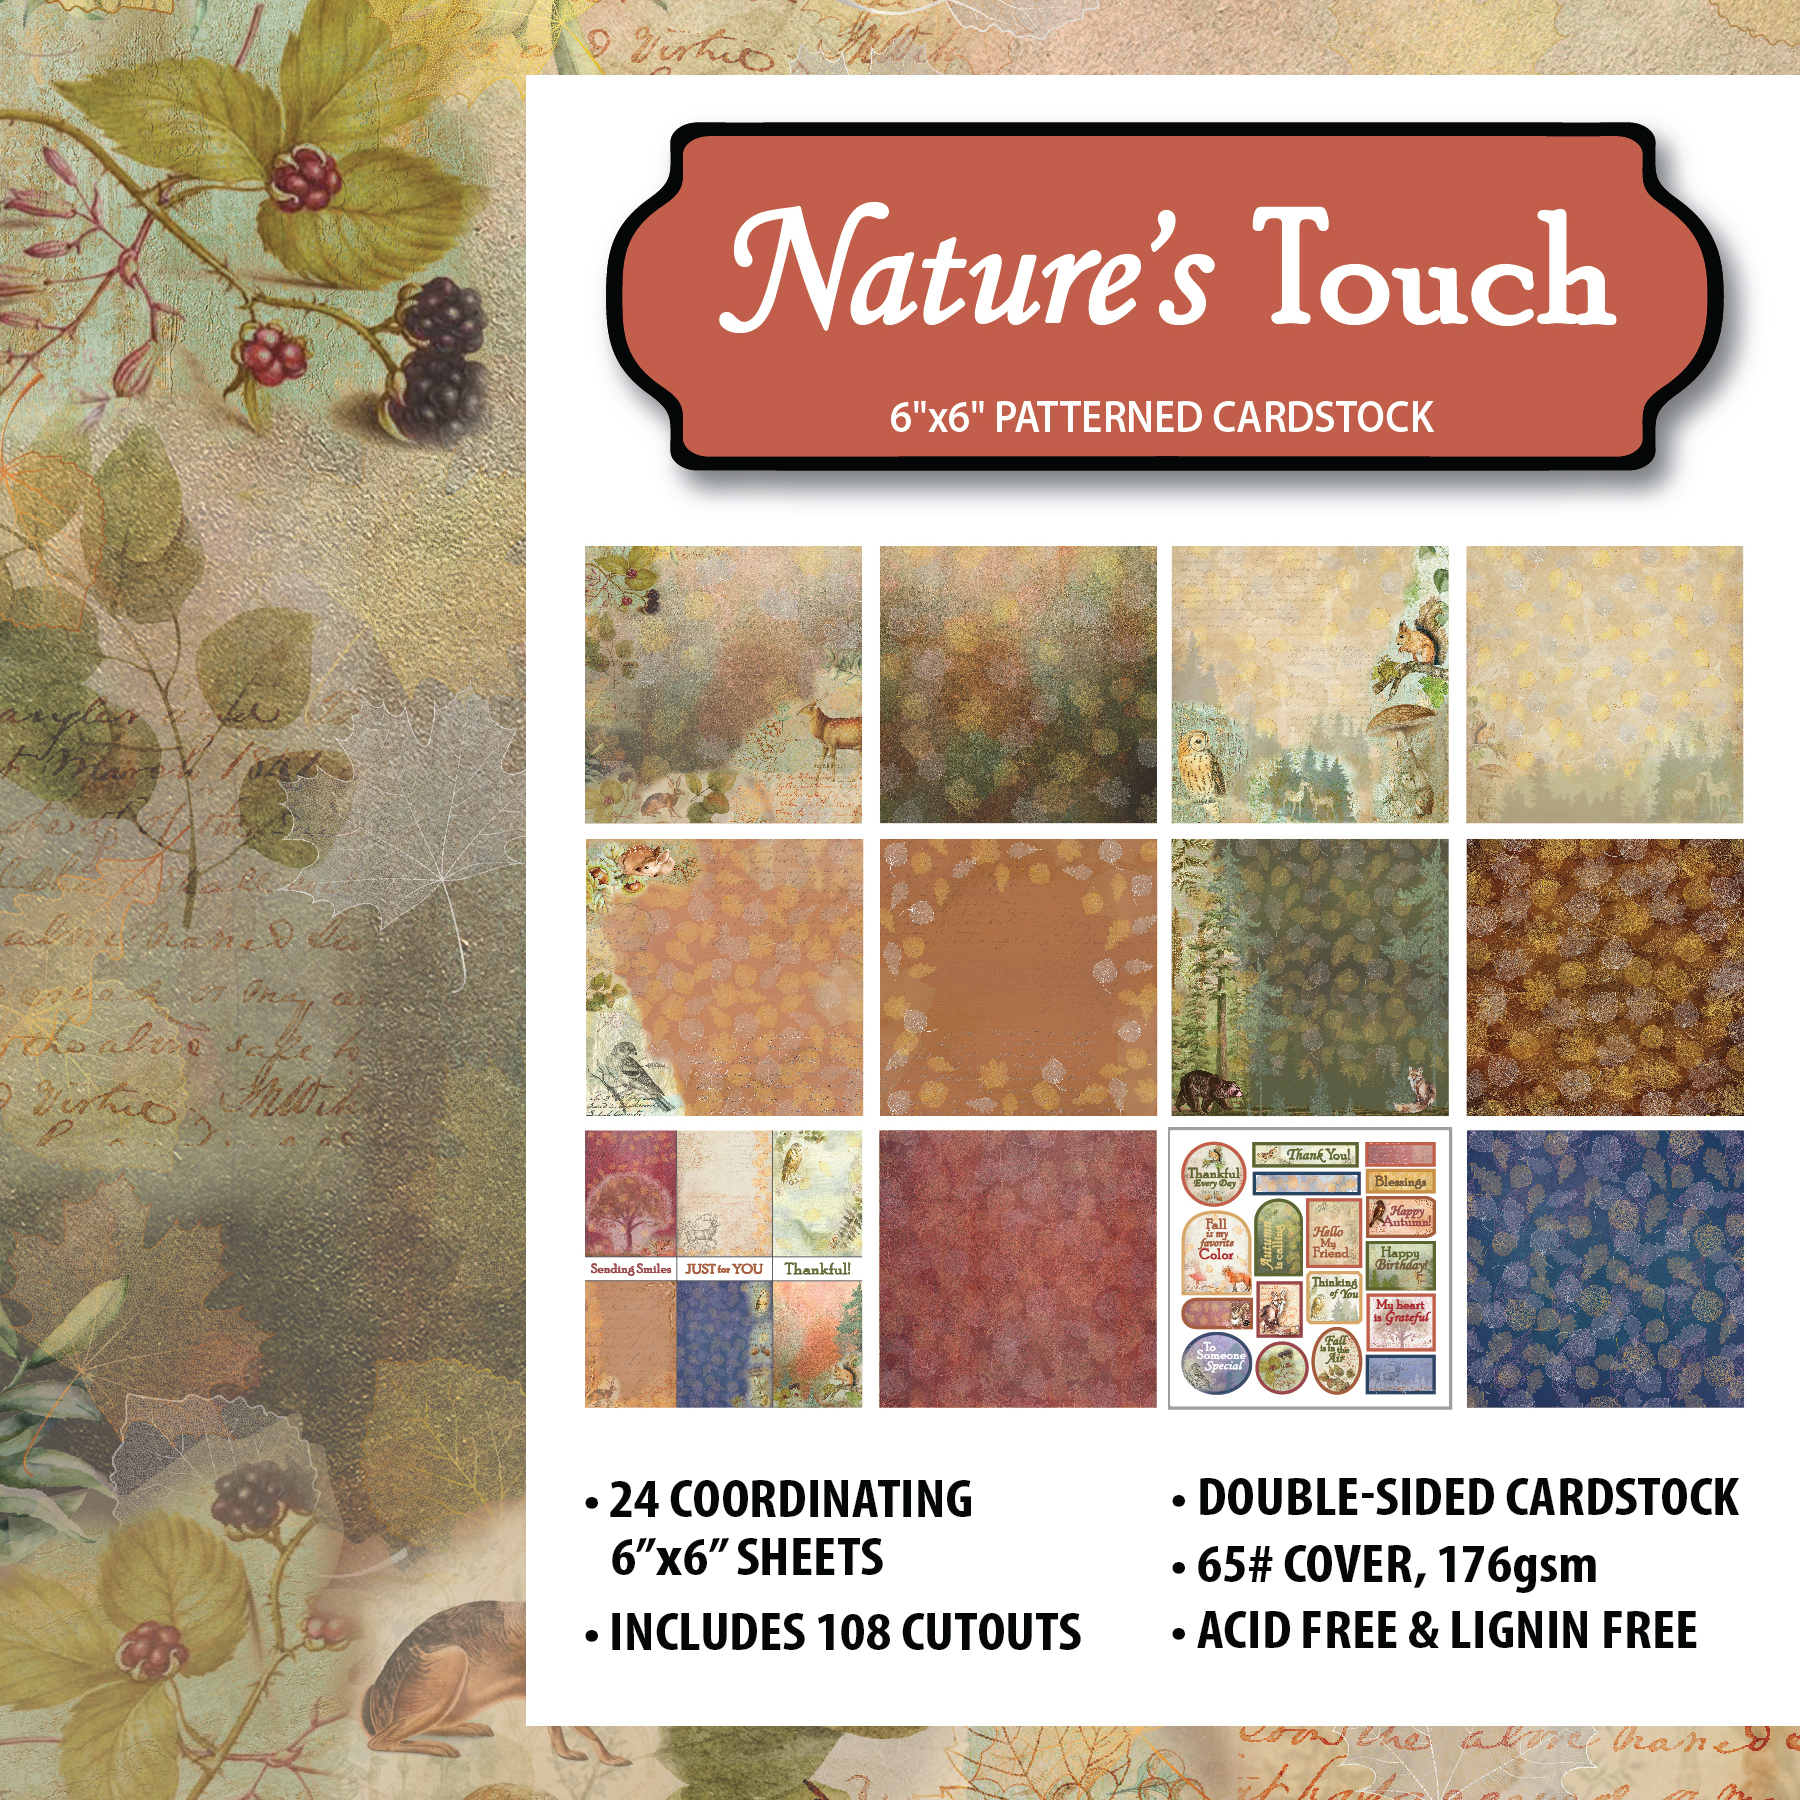 Nature's Touch 6x6 Patterned Cardstock